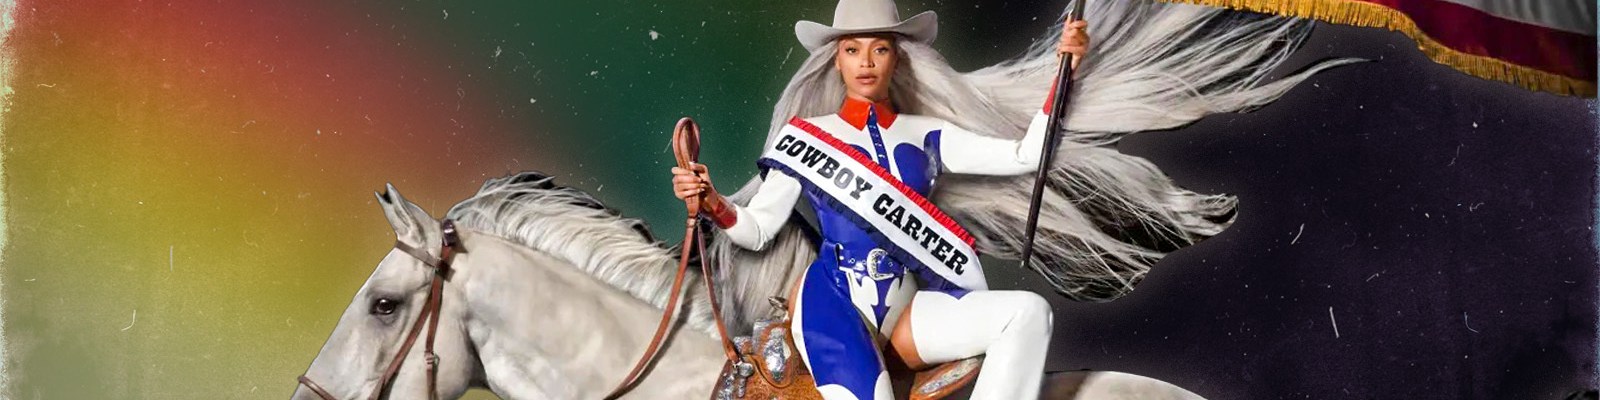 Beyoncé’s Excellent ‘Cowboy Carter’ Is A Win In A Fight That Should Have Never Existed